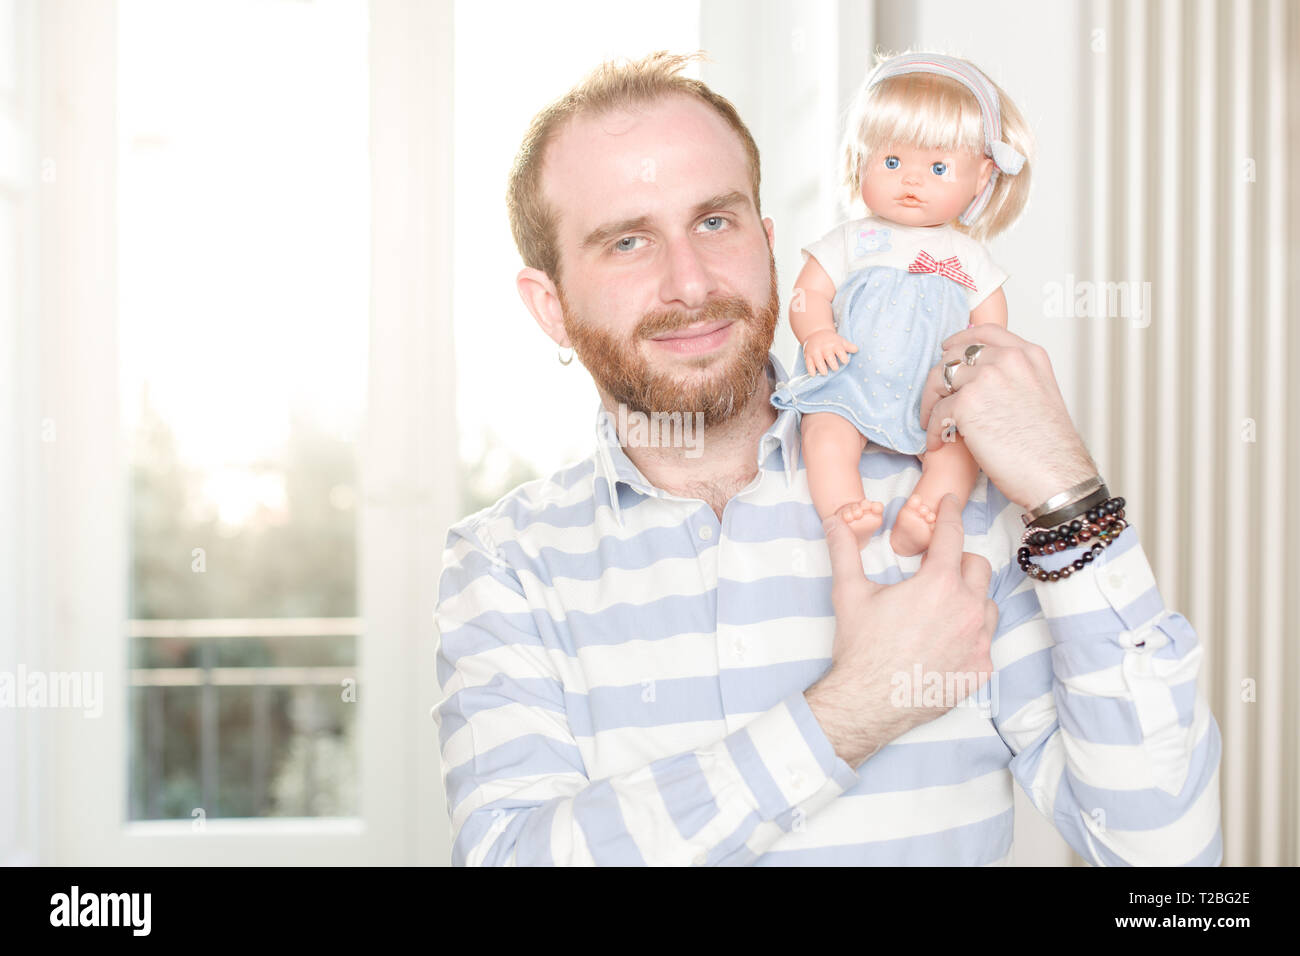 Smiling Man with a Doll on His Shoulder Stock Photo